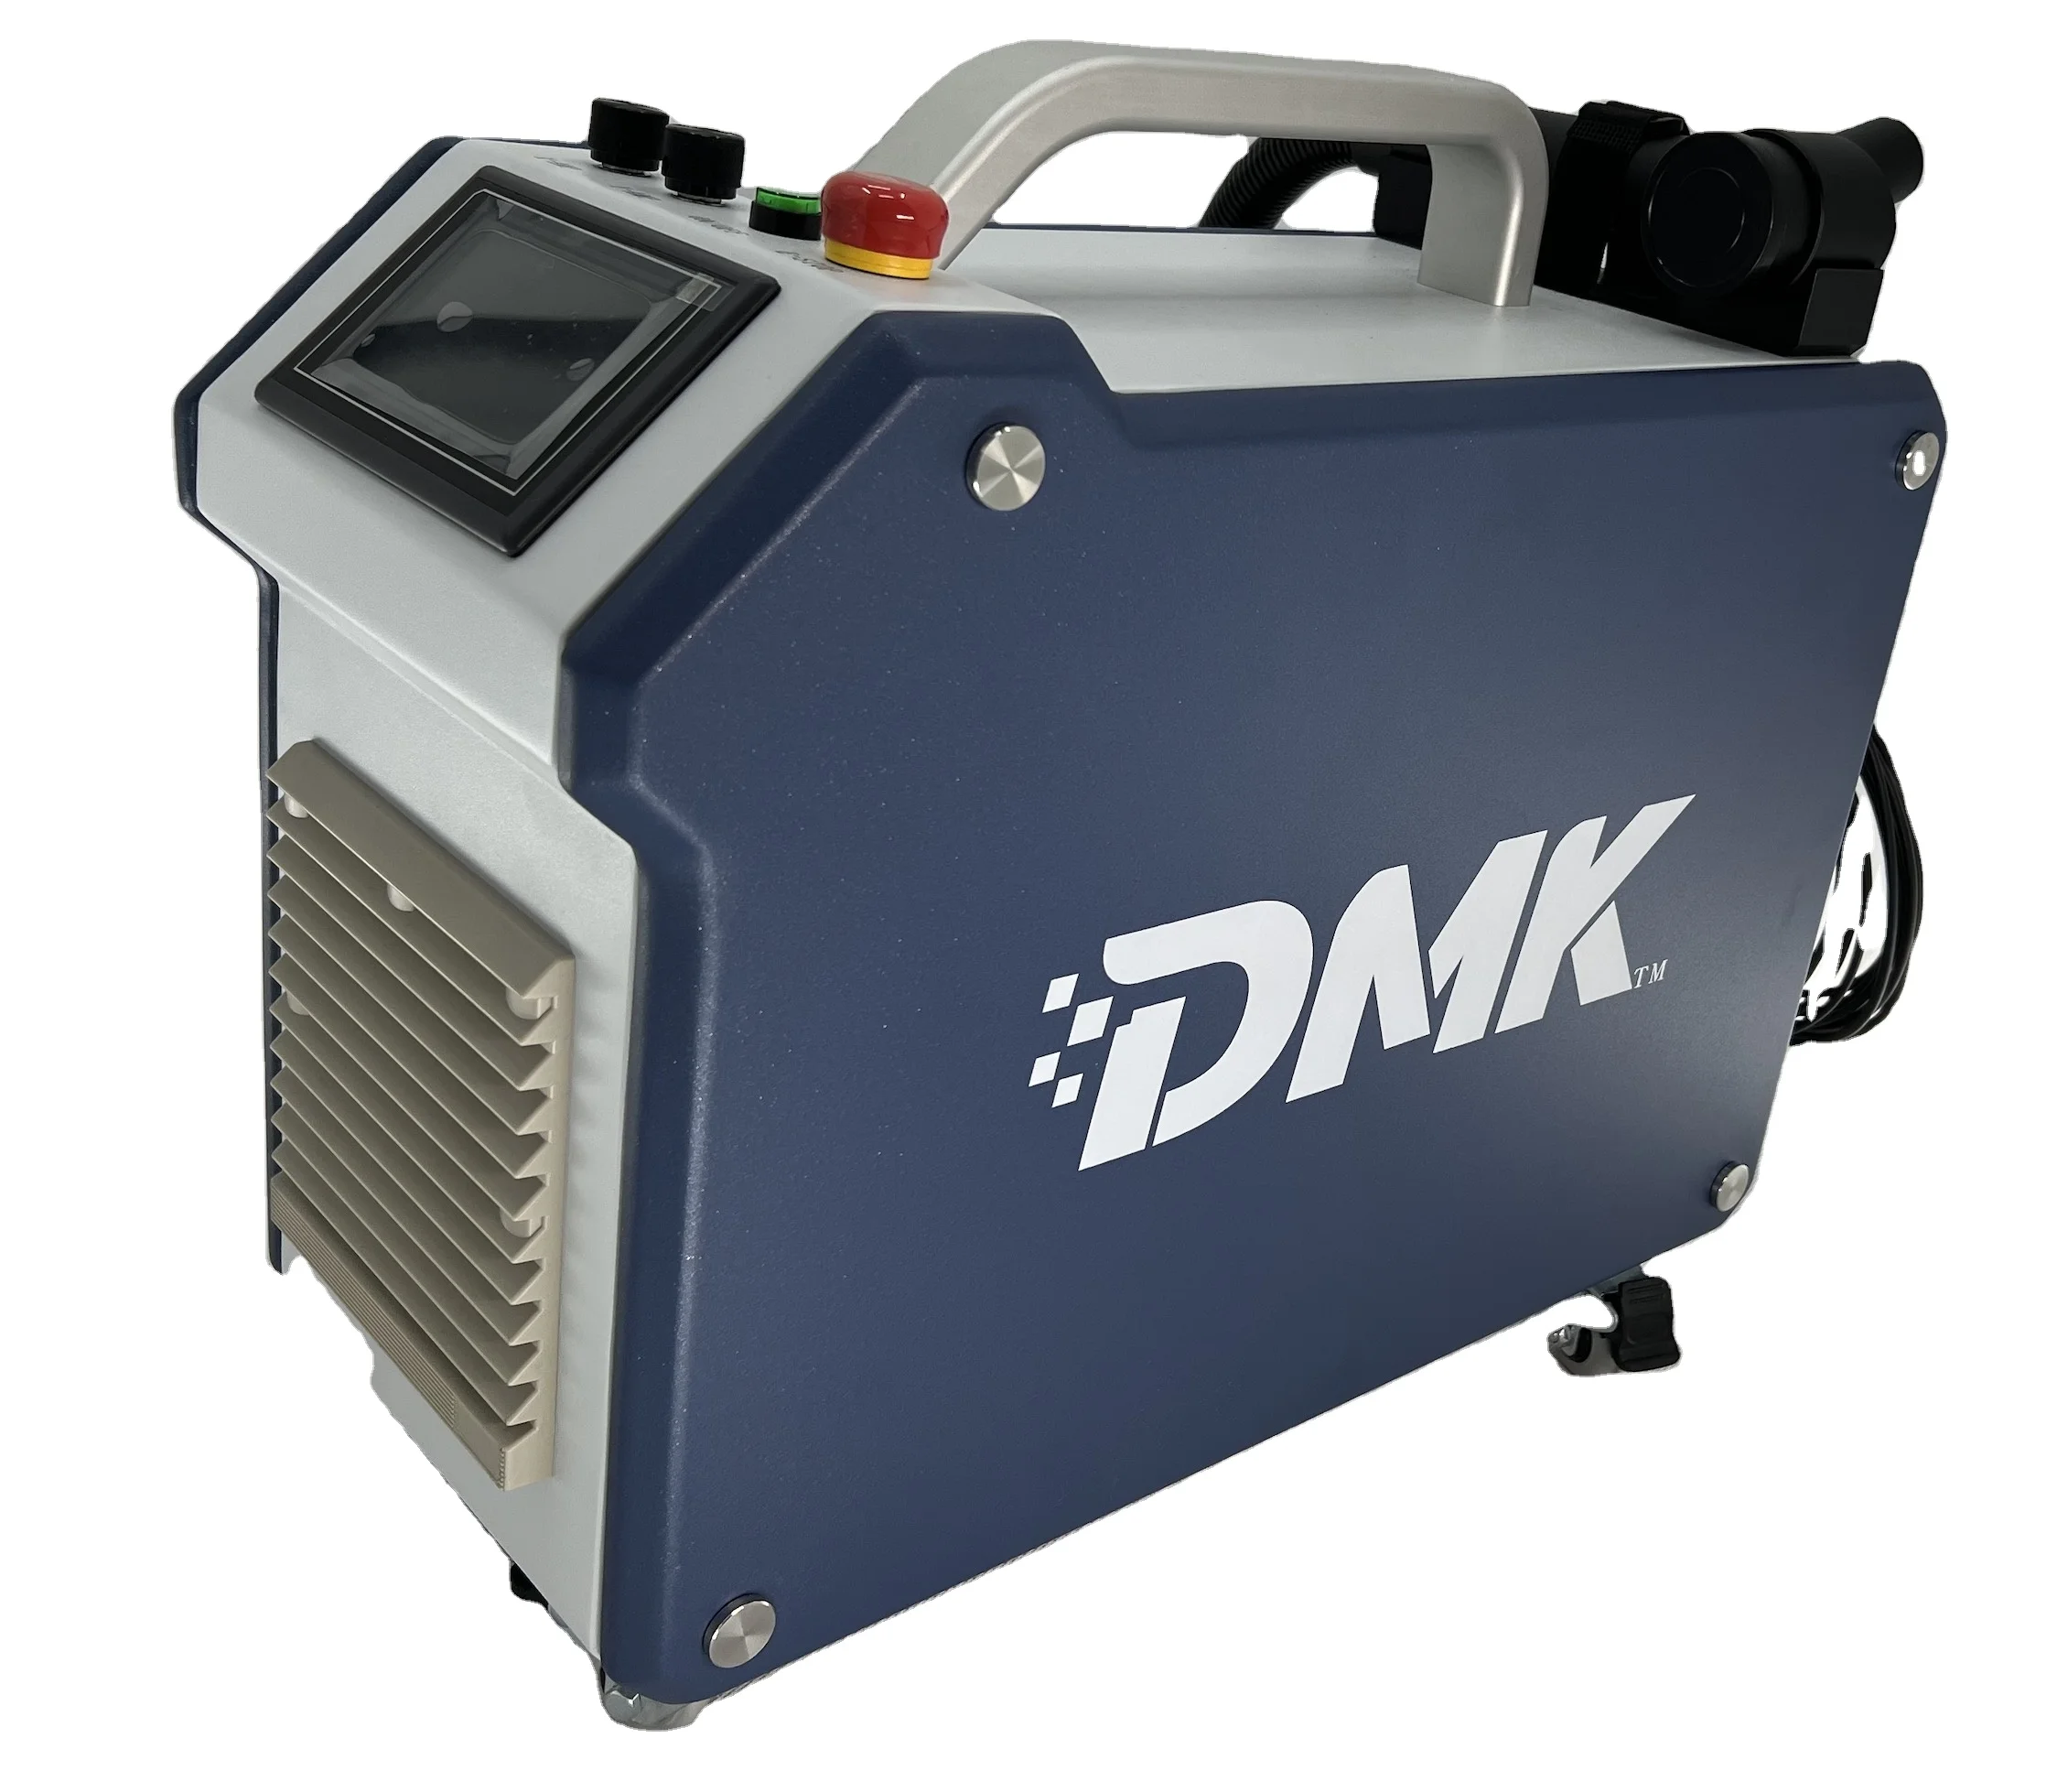 

DMK 100W 200W Laser Rust Removal Portable Cleaner Lazer Cleaning Rust Paint Machine